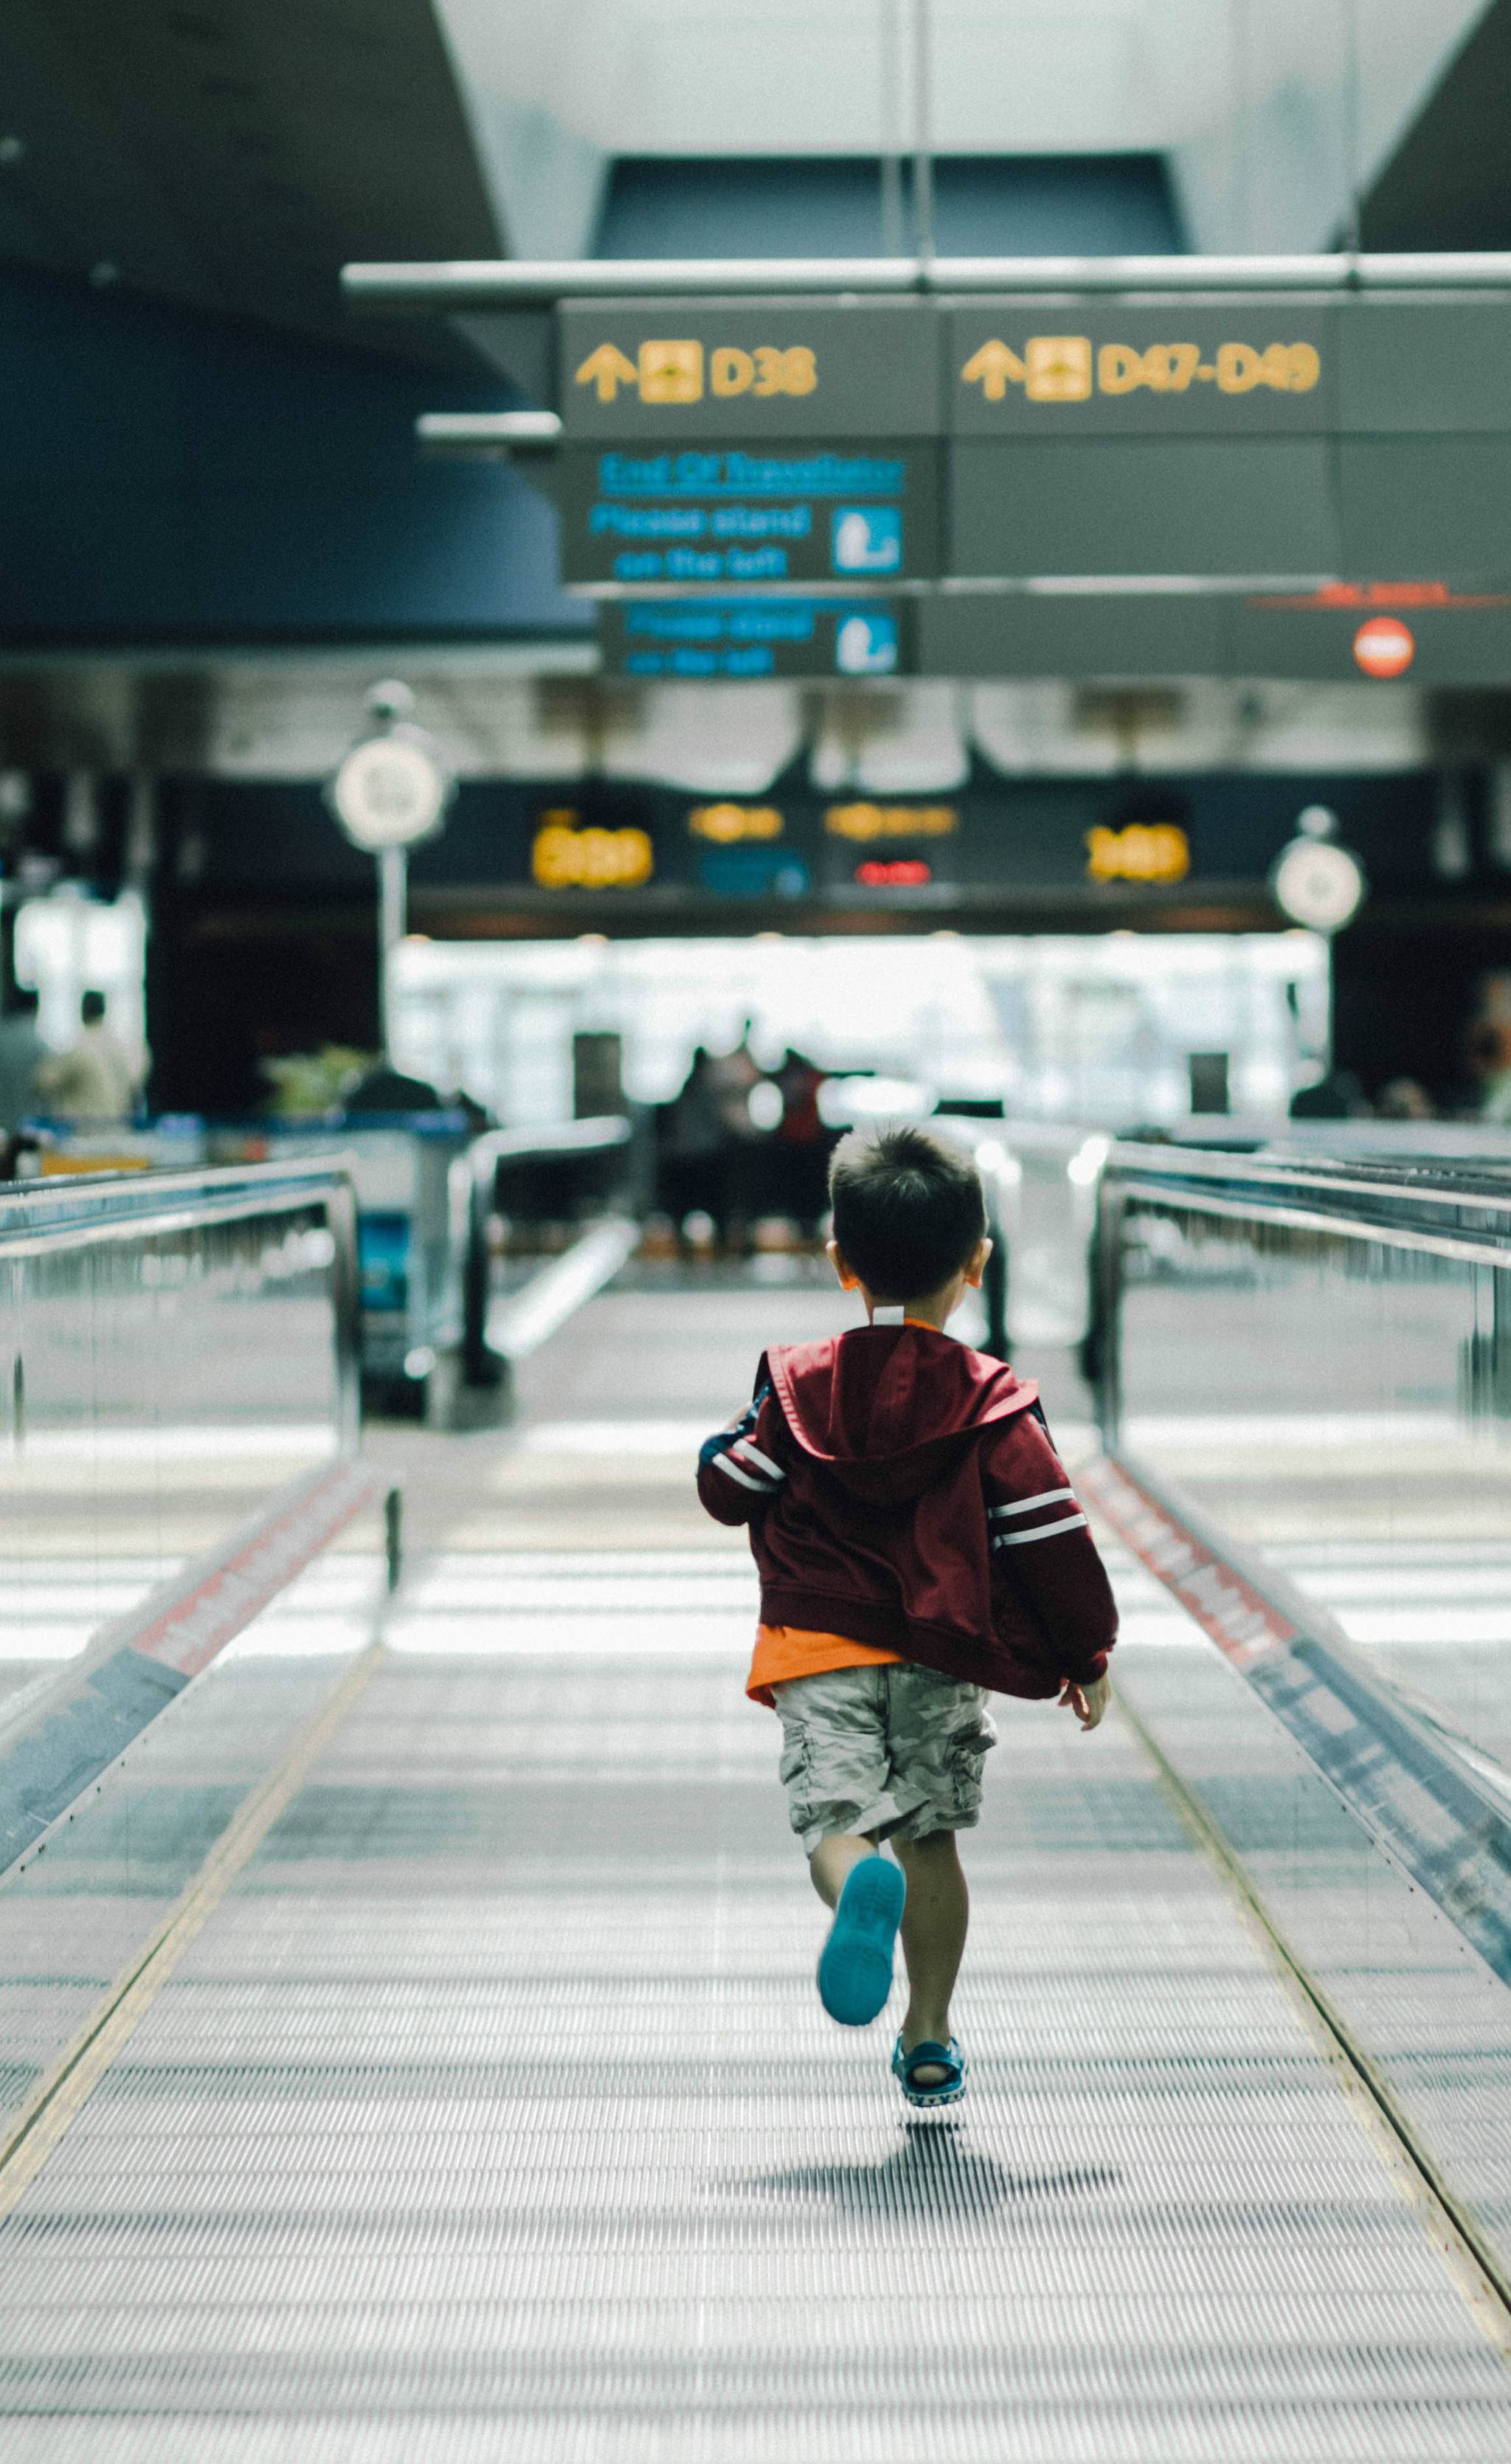 How are airports adapting to future travellers’ needs?